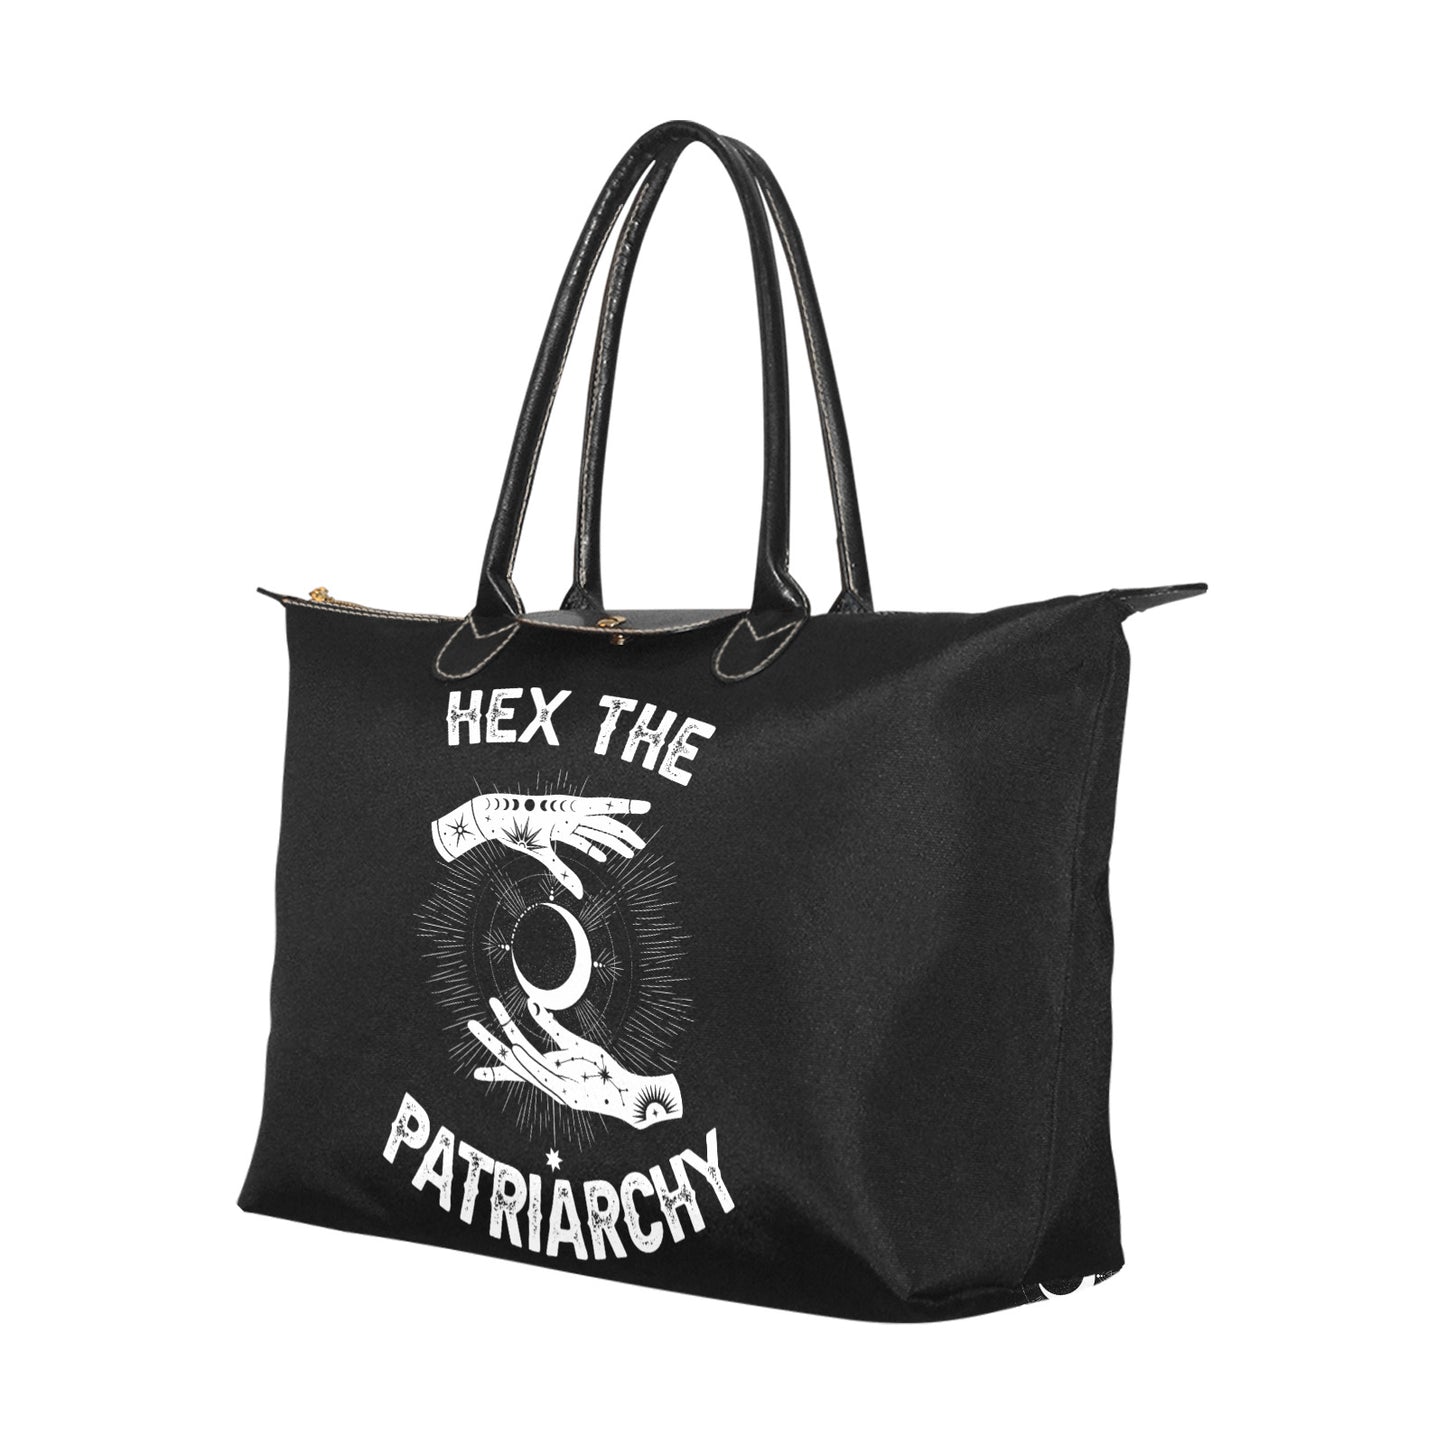 HEX the patriarchy Feminist Witch zip tote Women's Classic Handbag